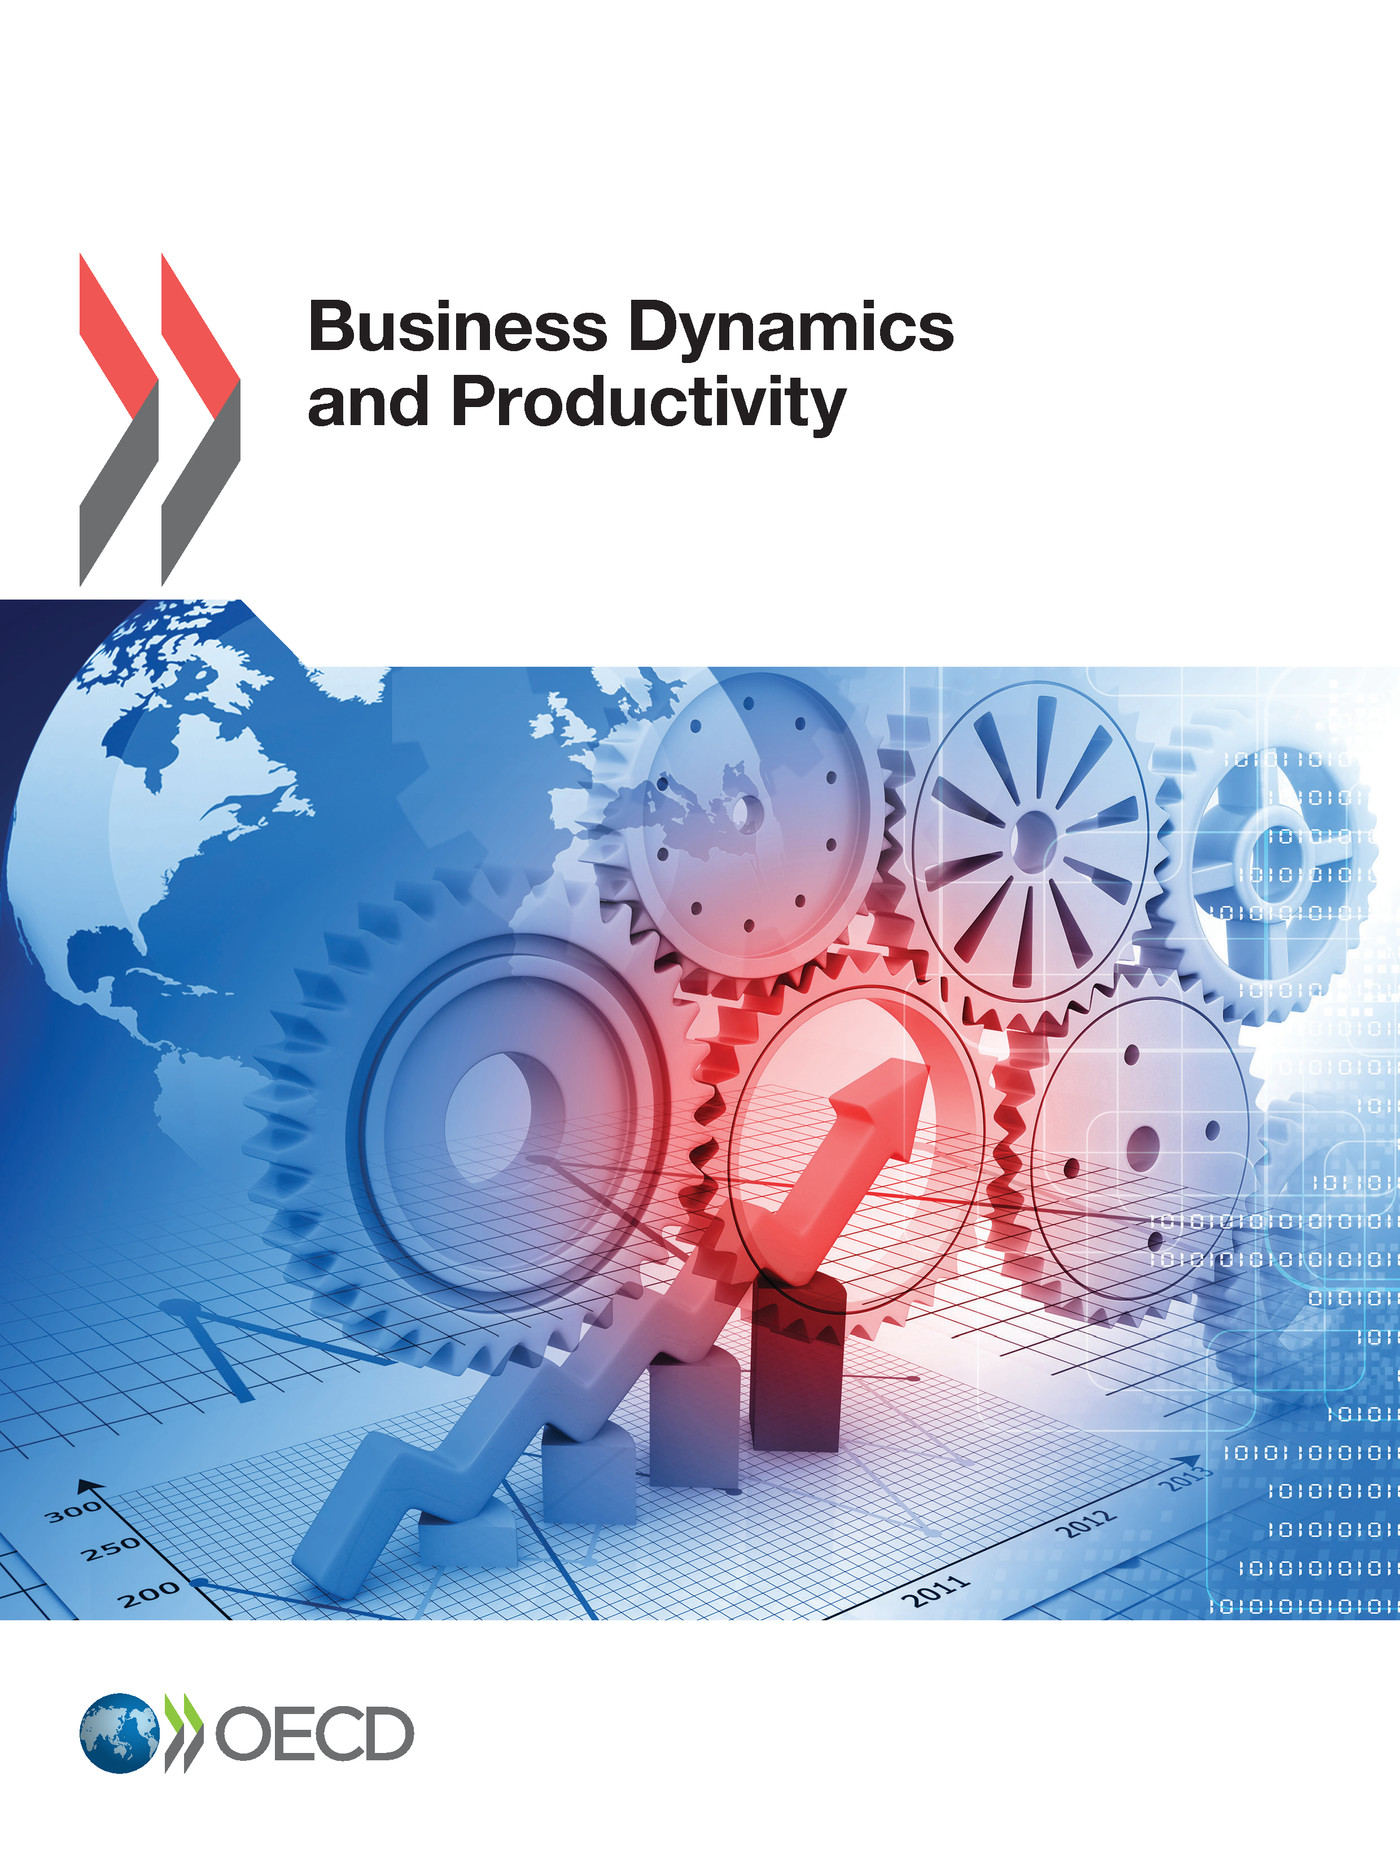 Business Dynamics and Productivity -  Collectif - OCDE / OECD